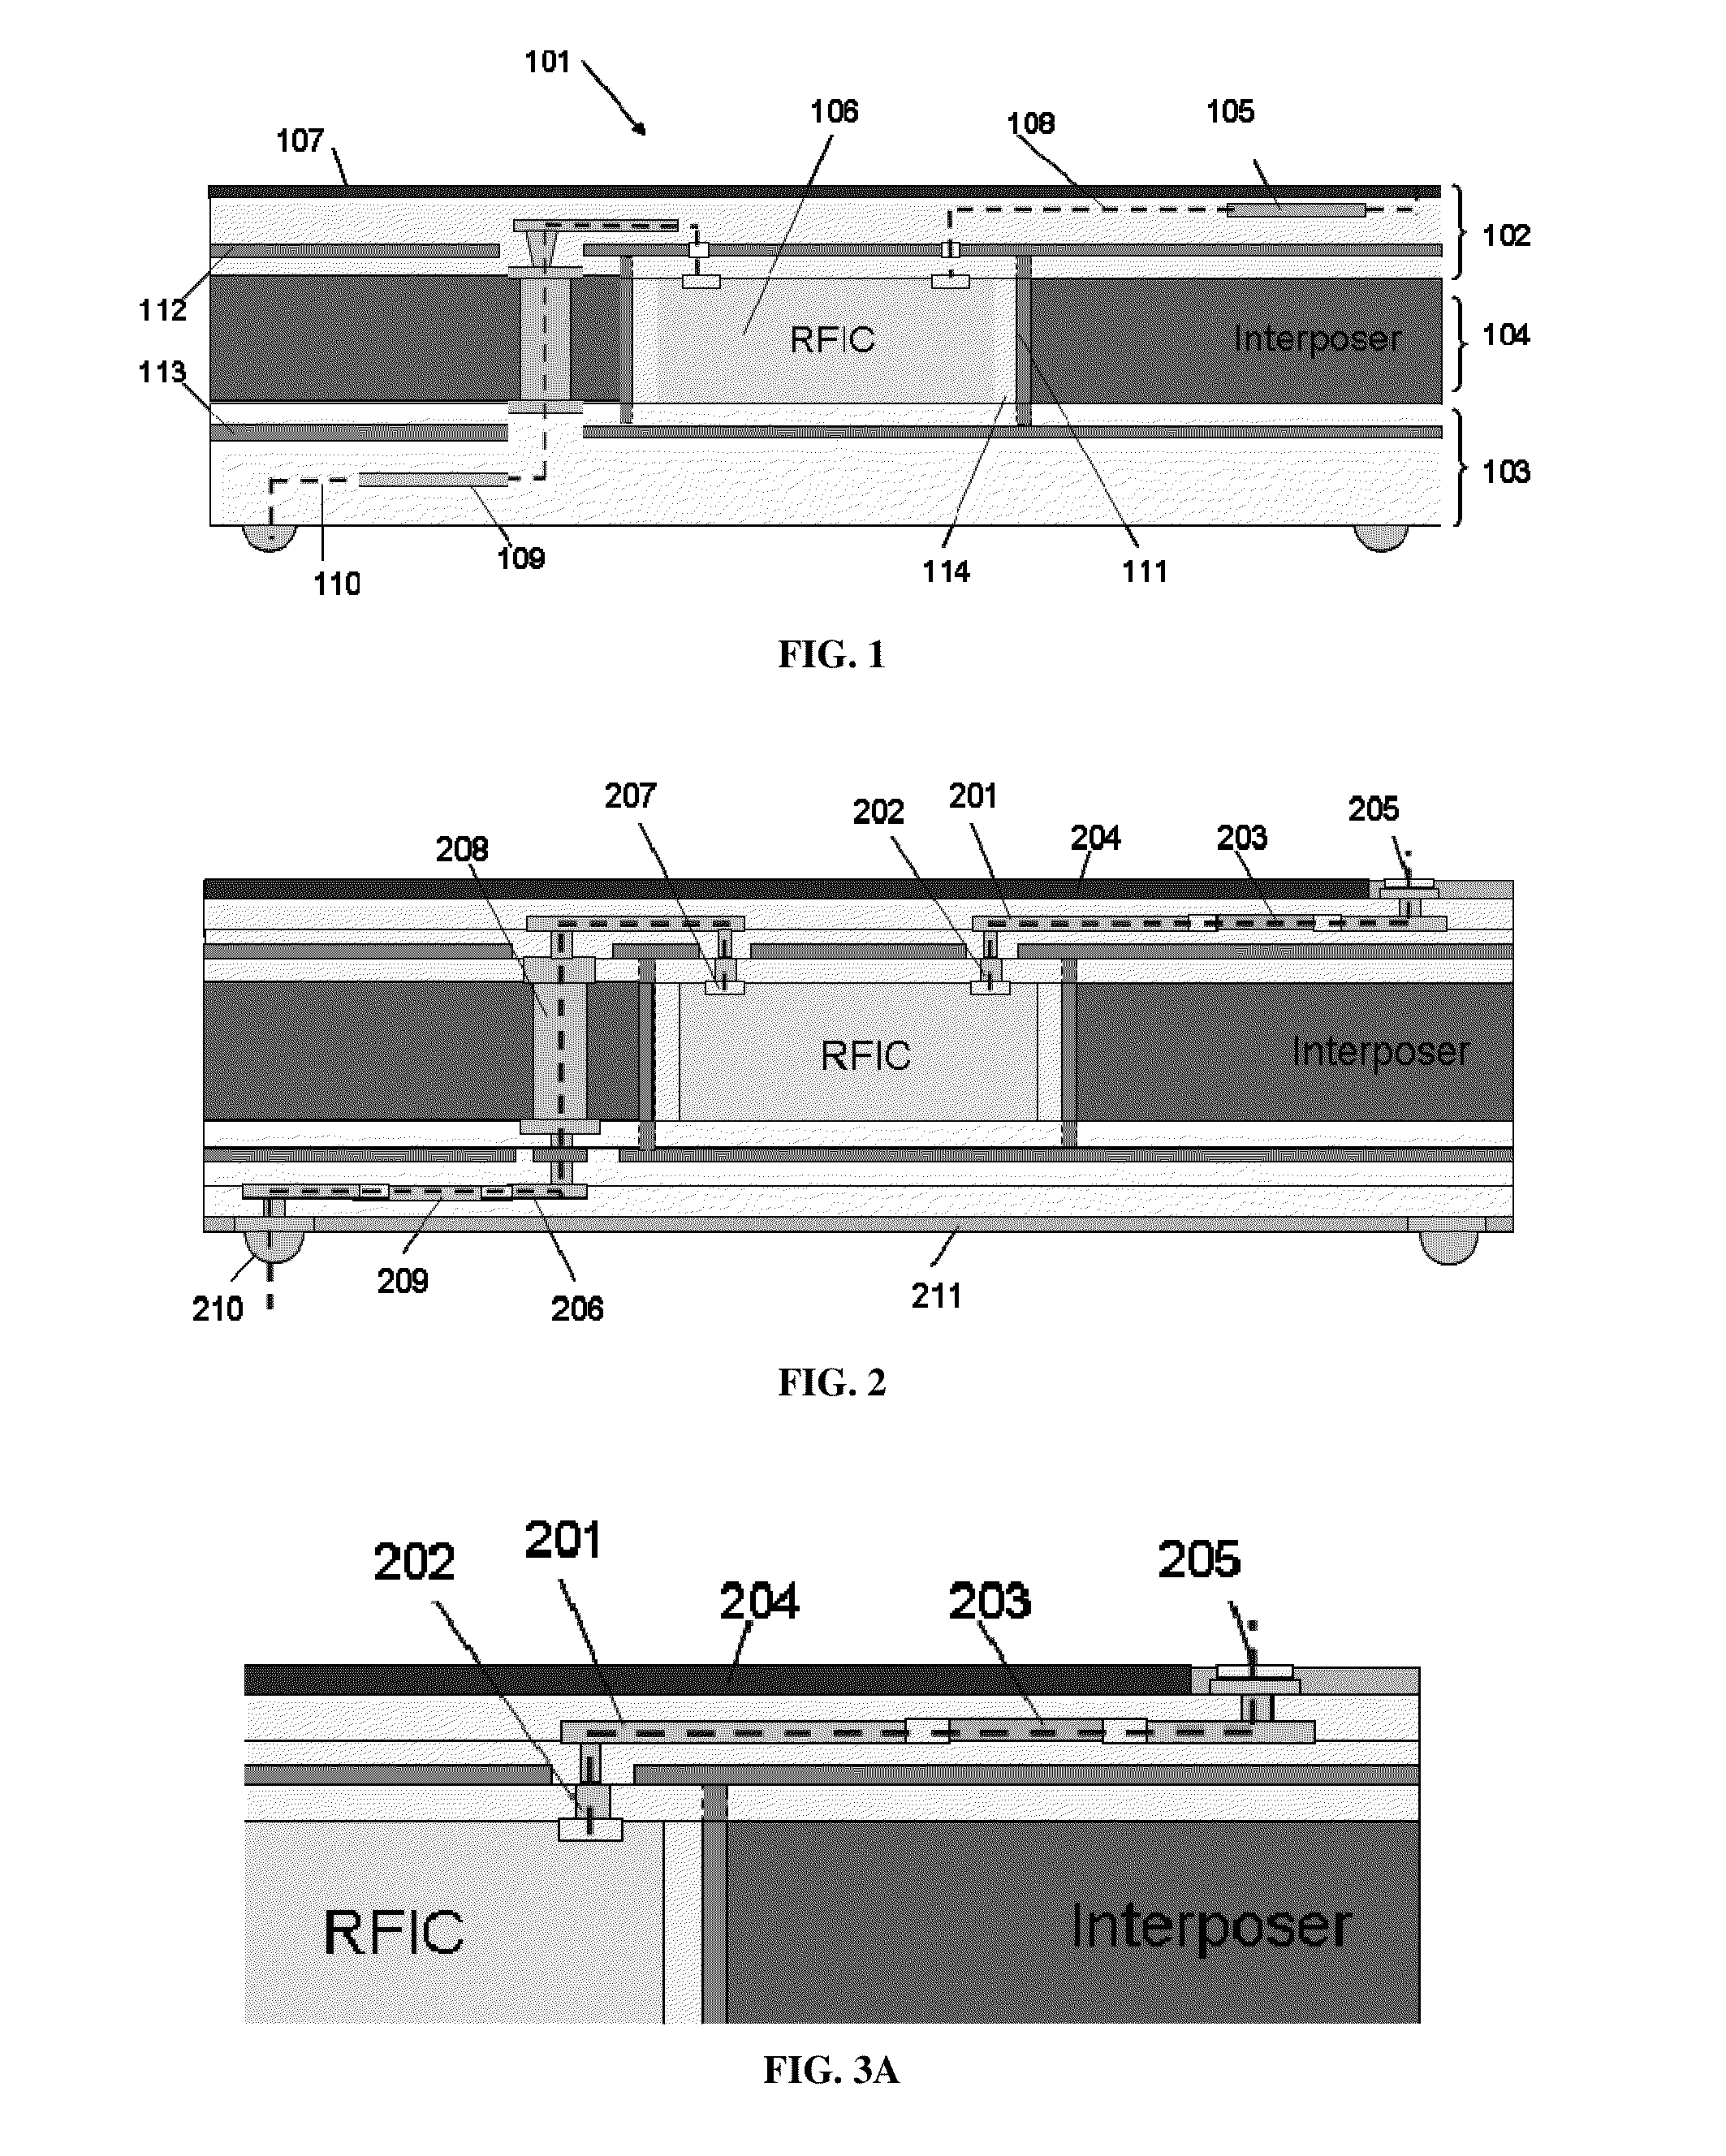 Partitioned Hybrid Substrate for Radio Frequency Applications